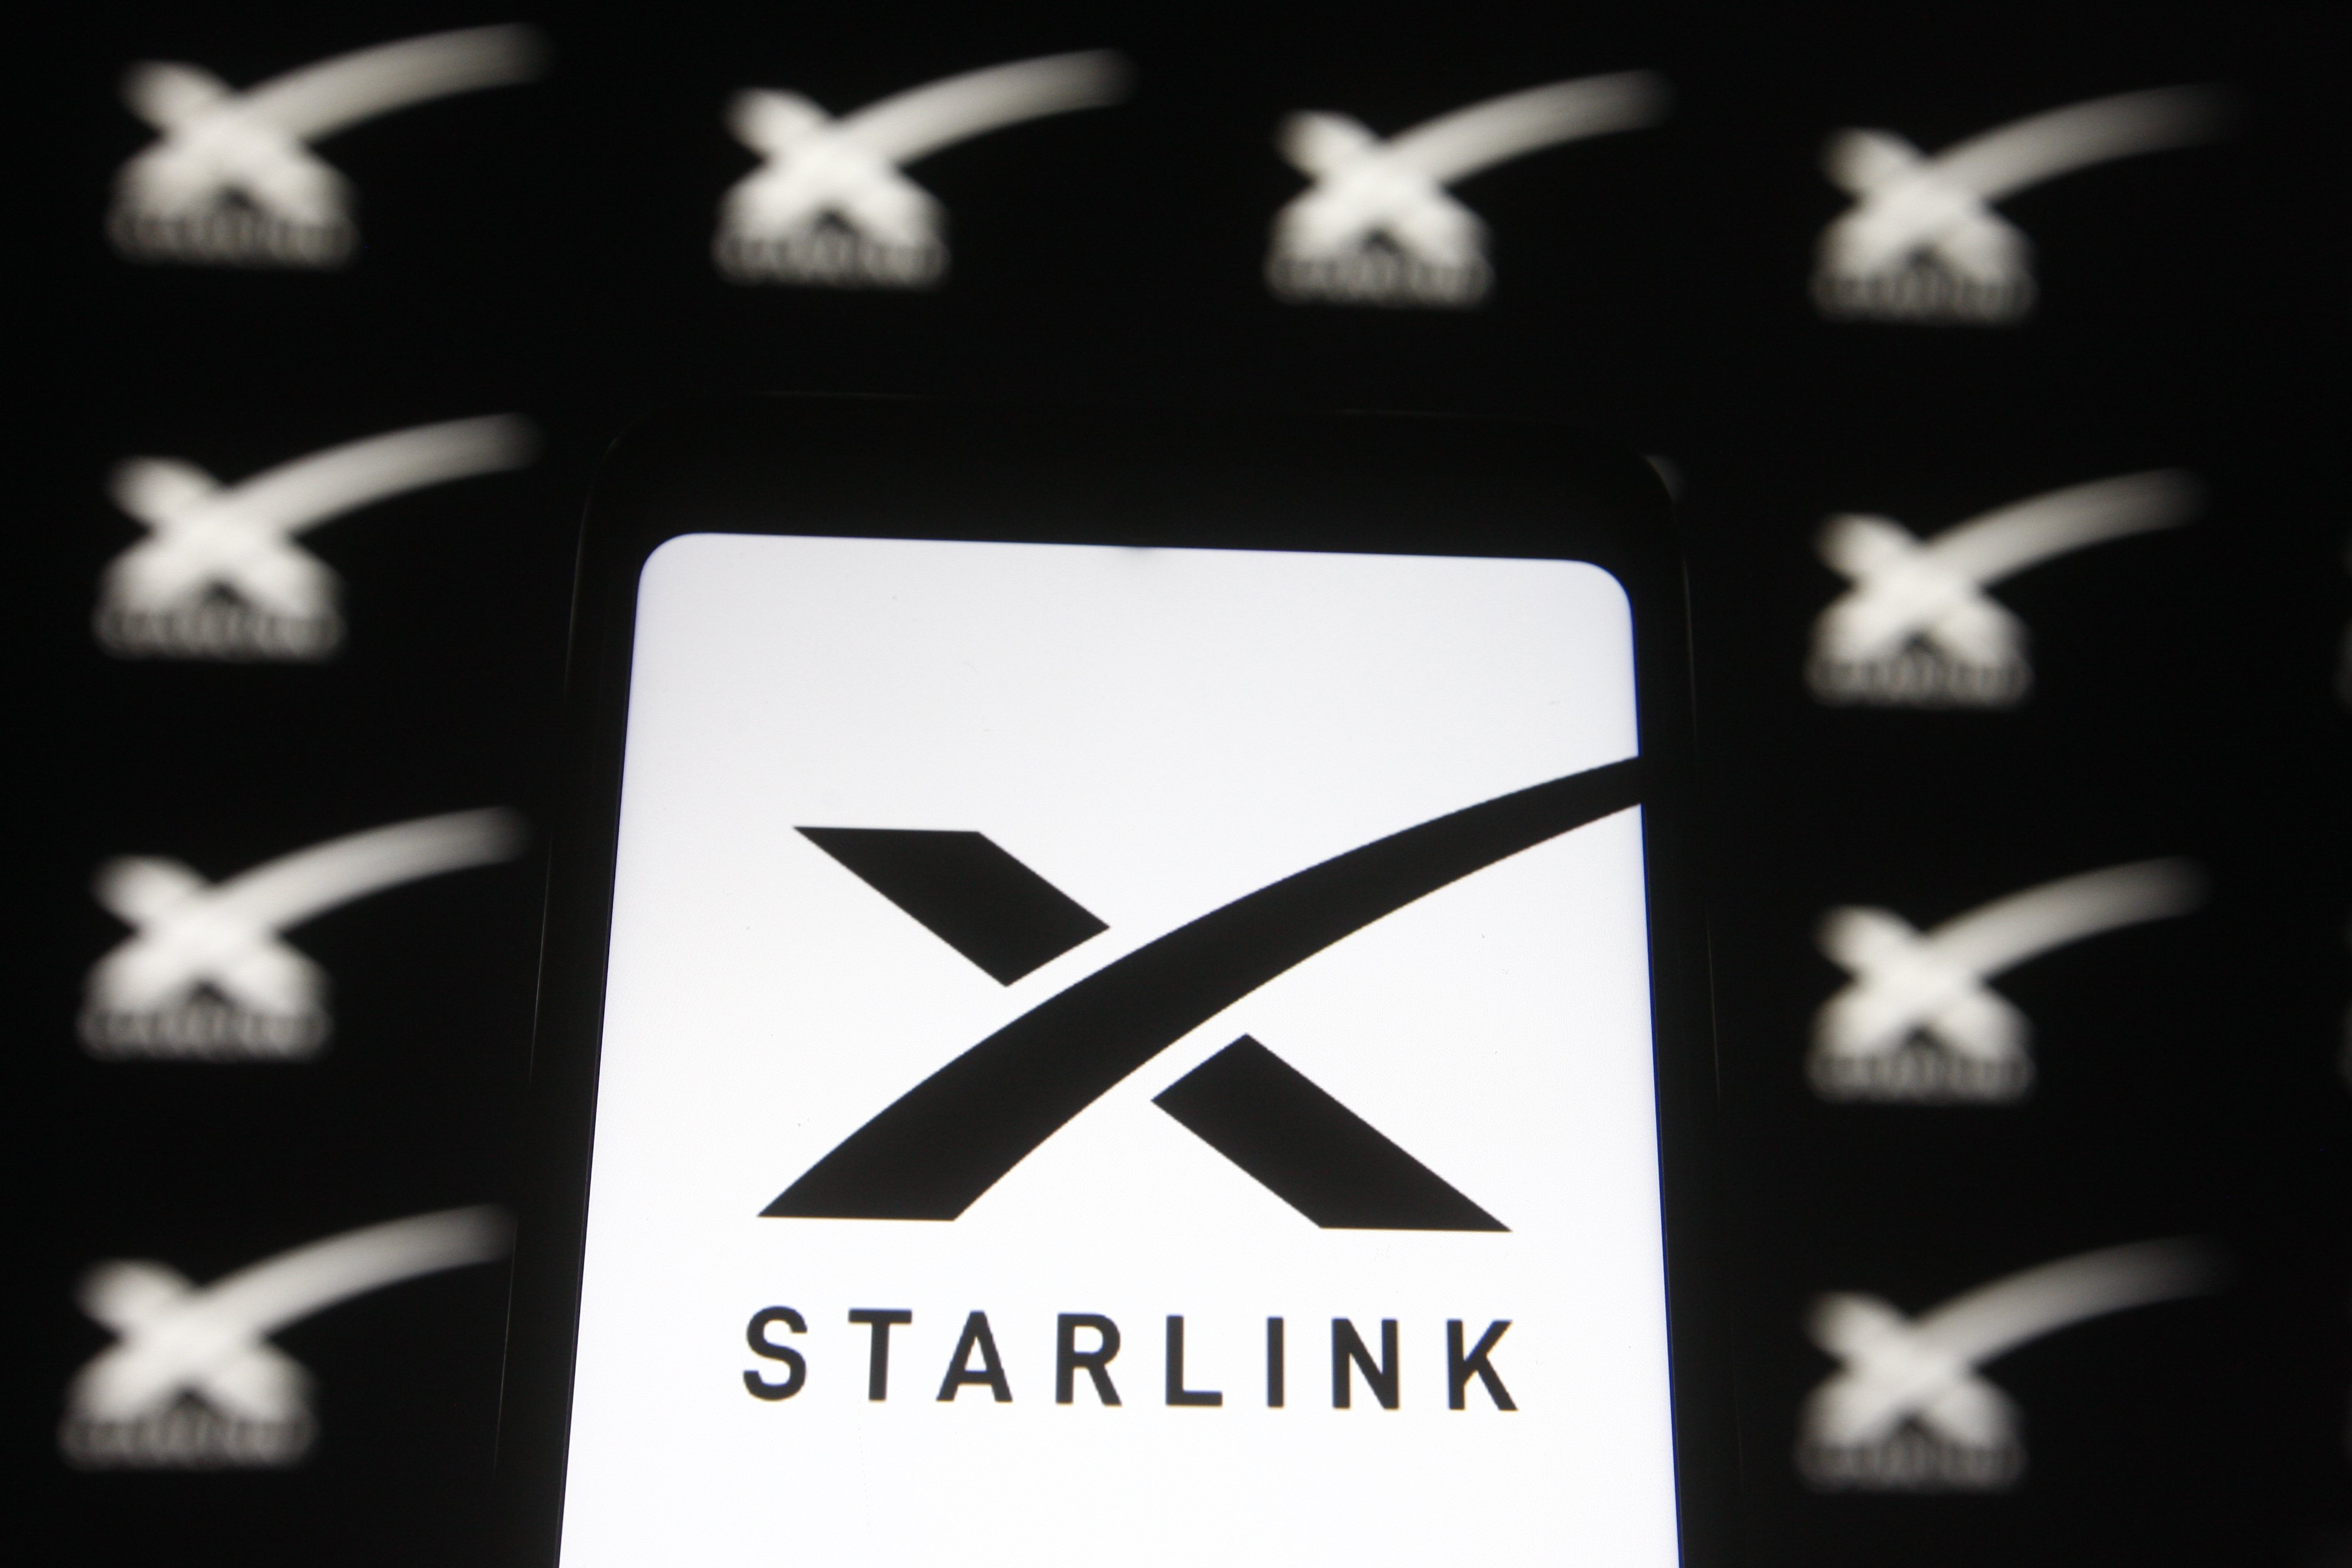 Starlink logo of a satellite internet constellation being constructed by SpaceX is seen on a smartphone and a pc screen